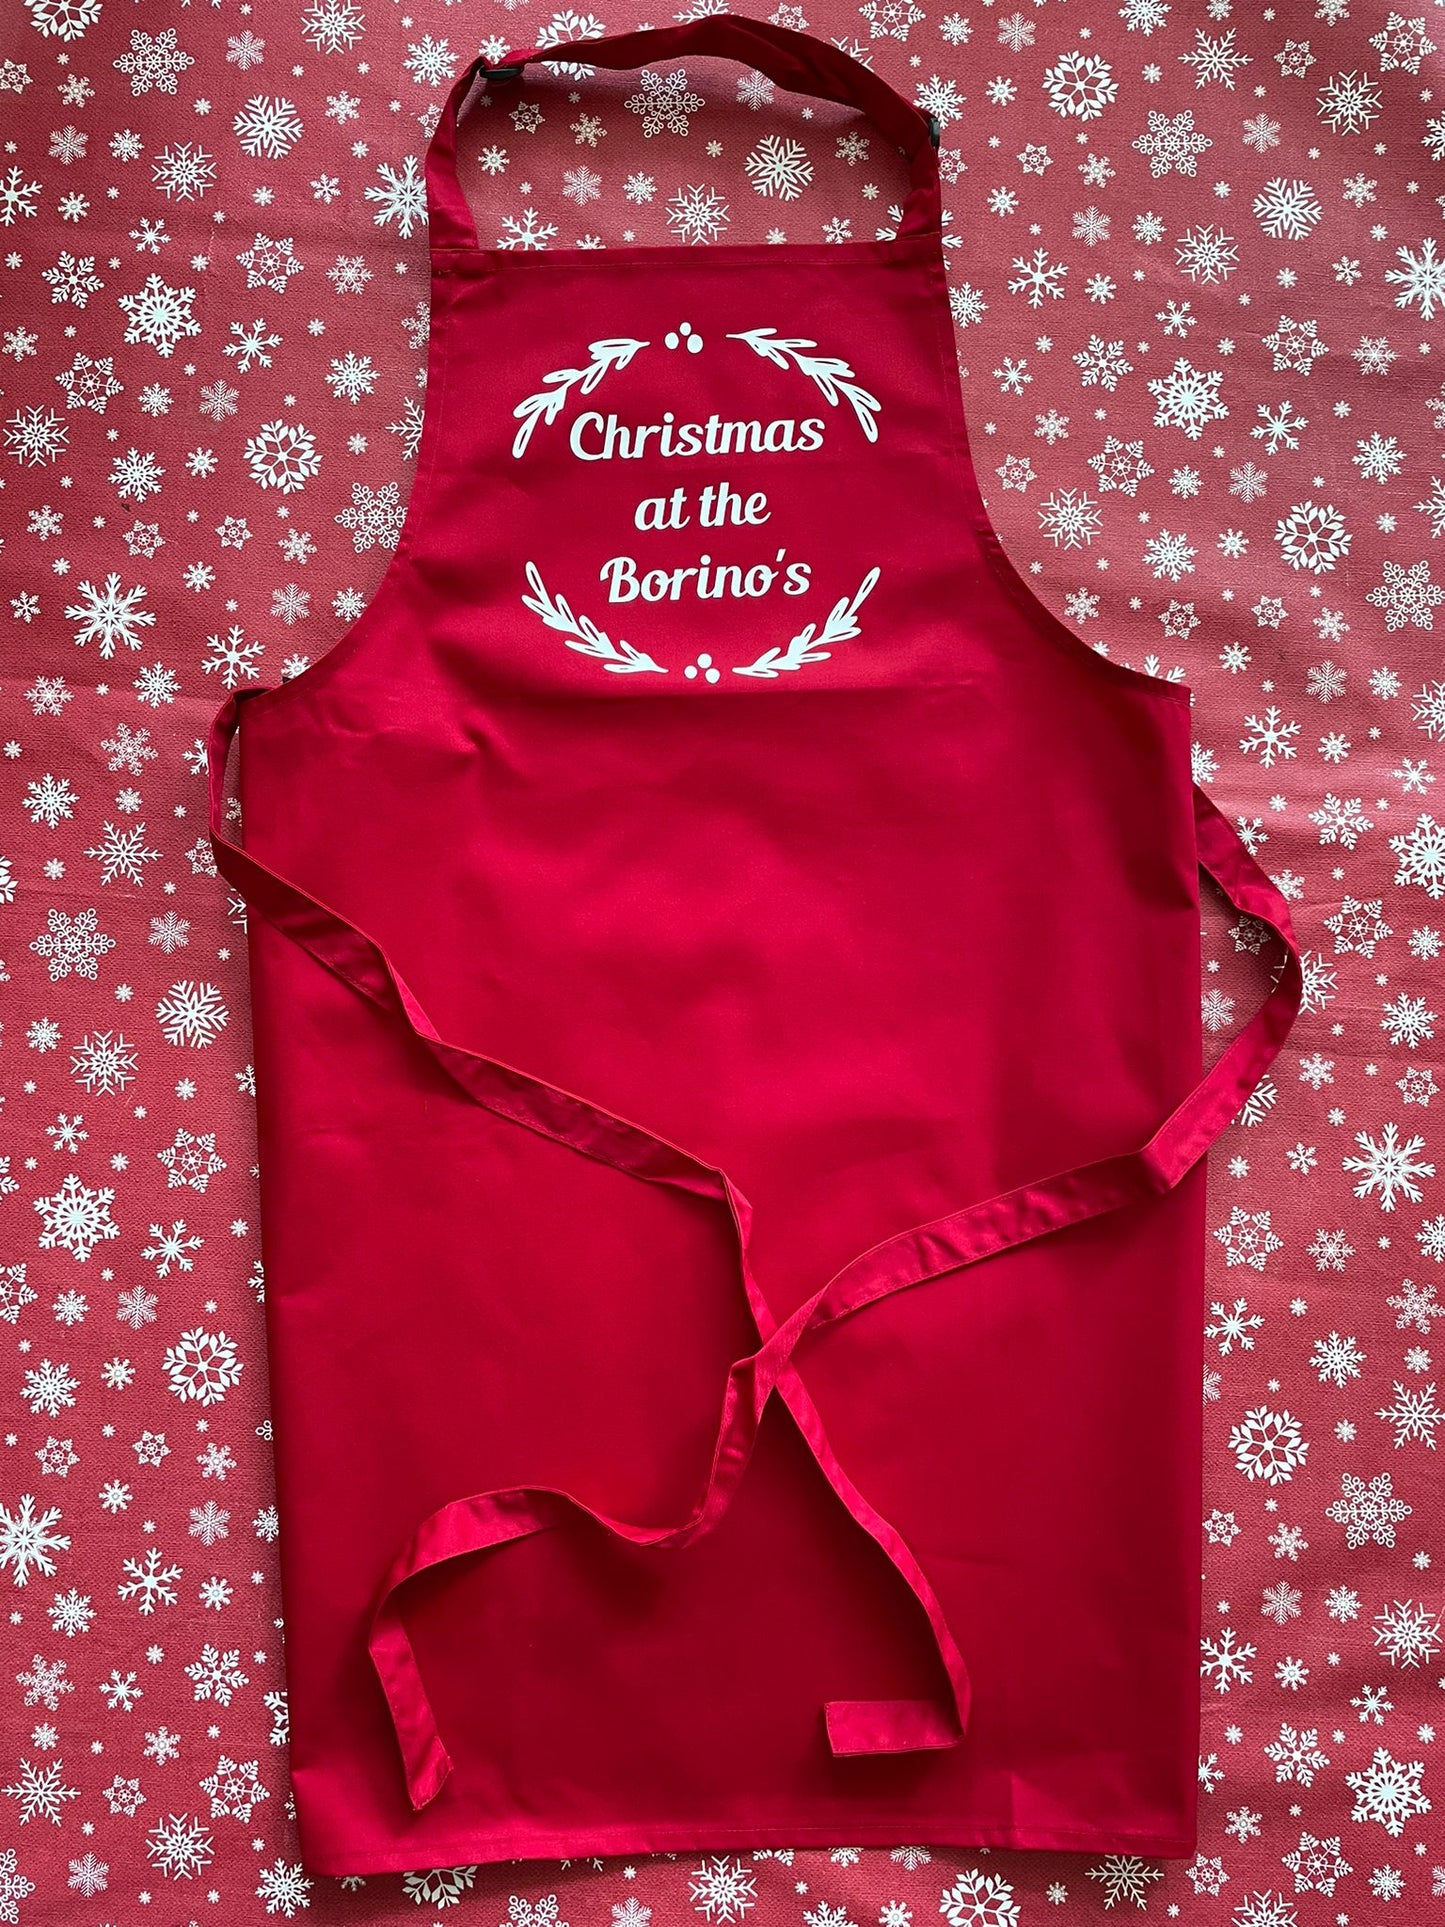 Christmas Printed apron, personalised with family name. High quality